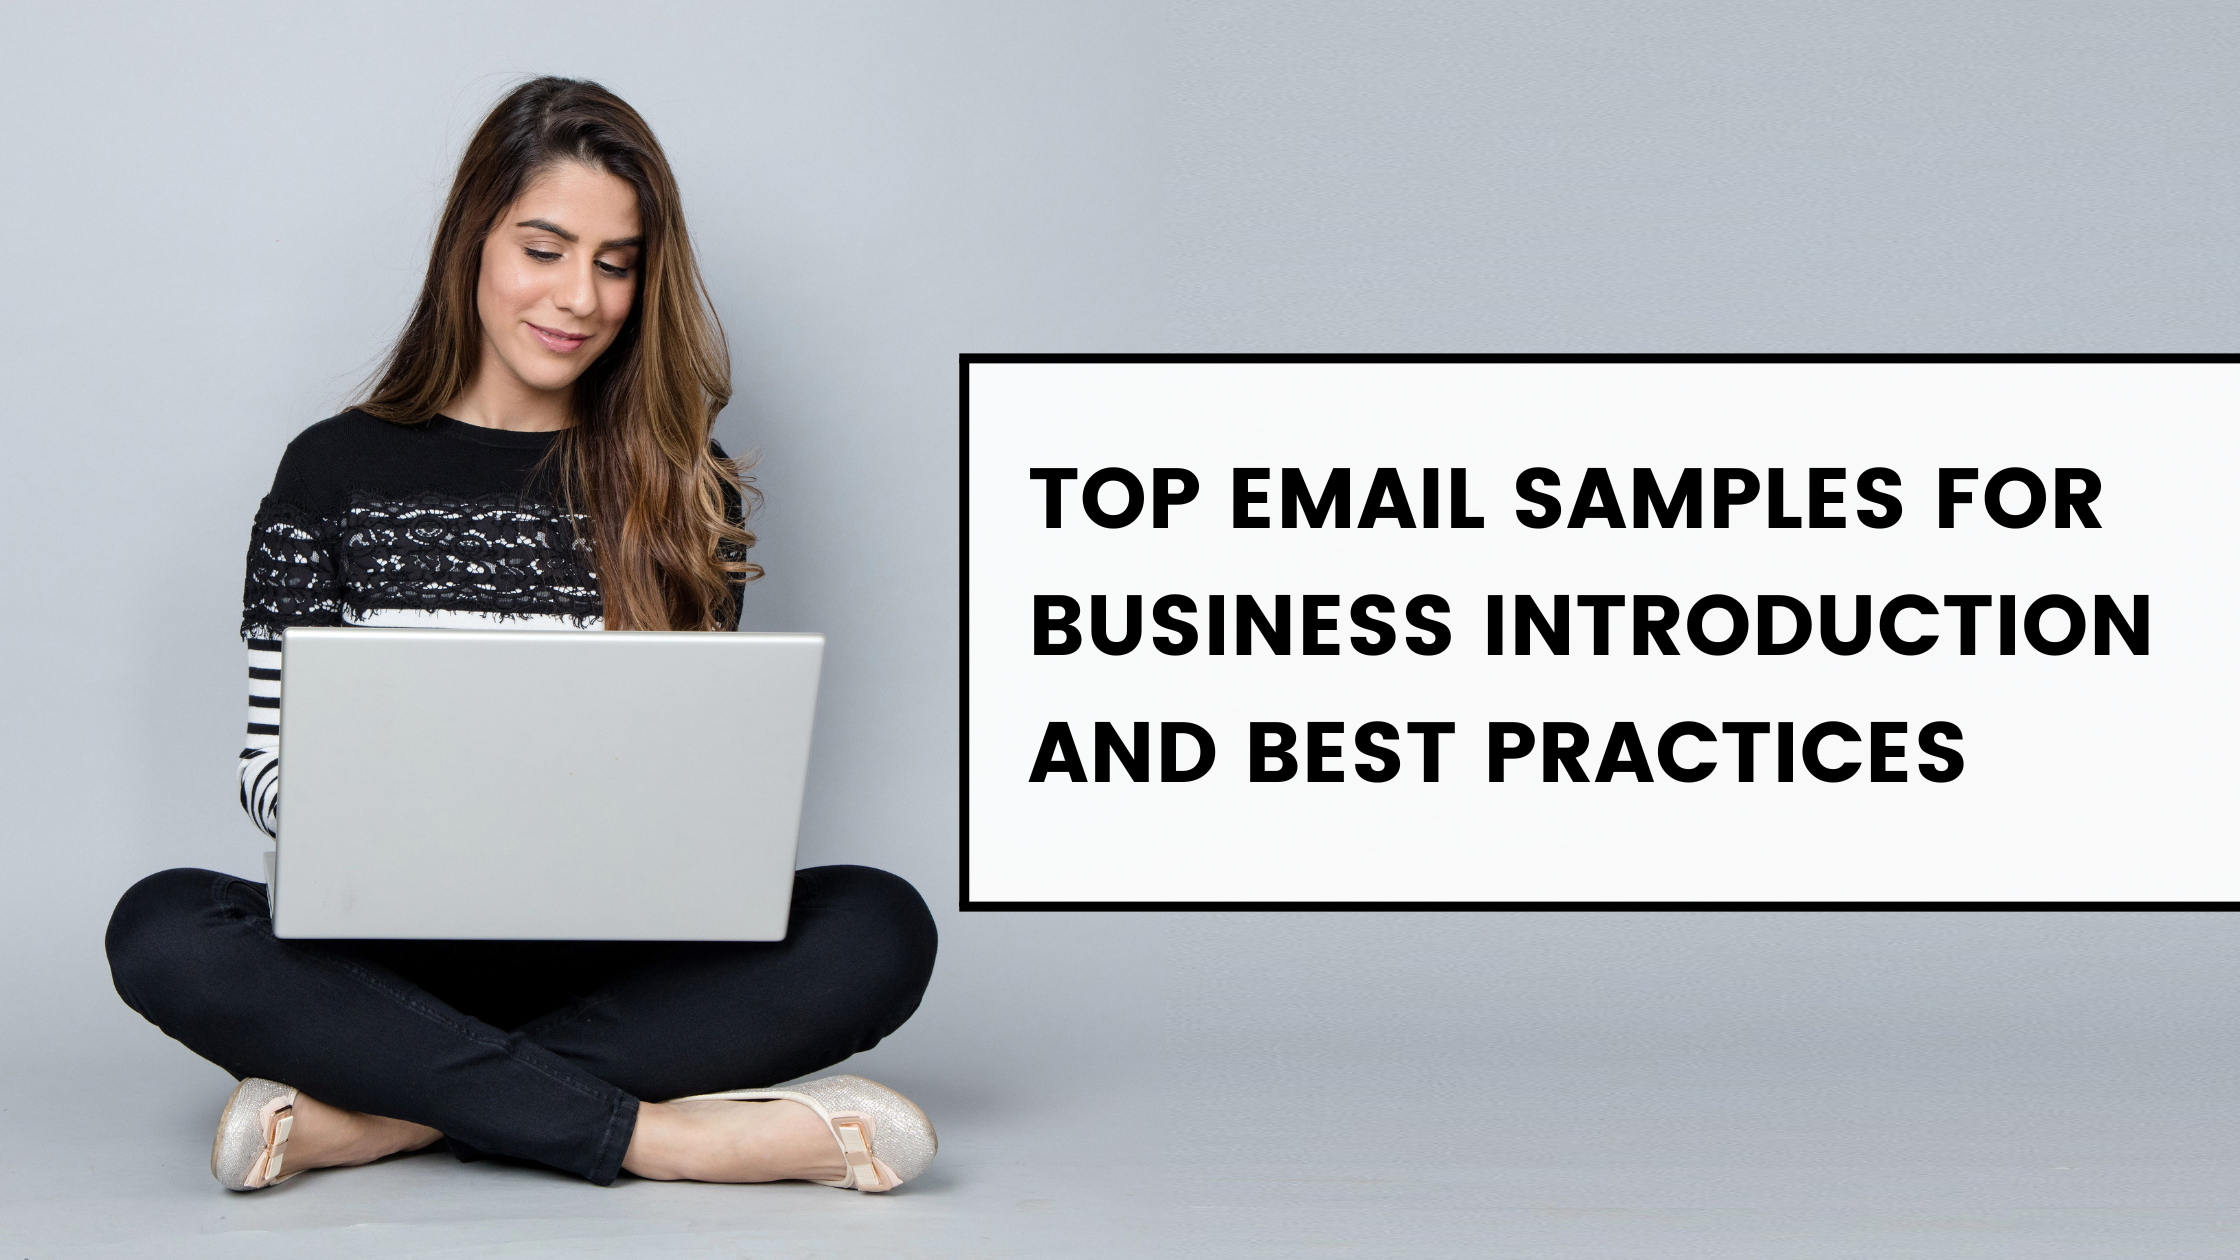 How to Write a Proper Email: Make the Right Impression